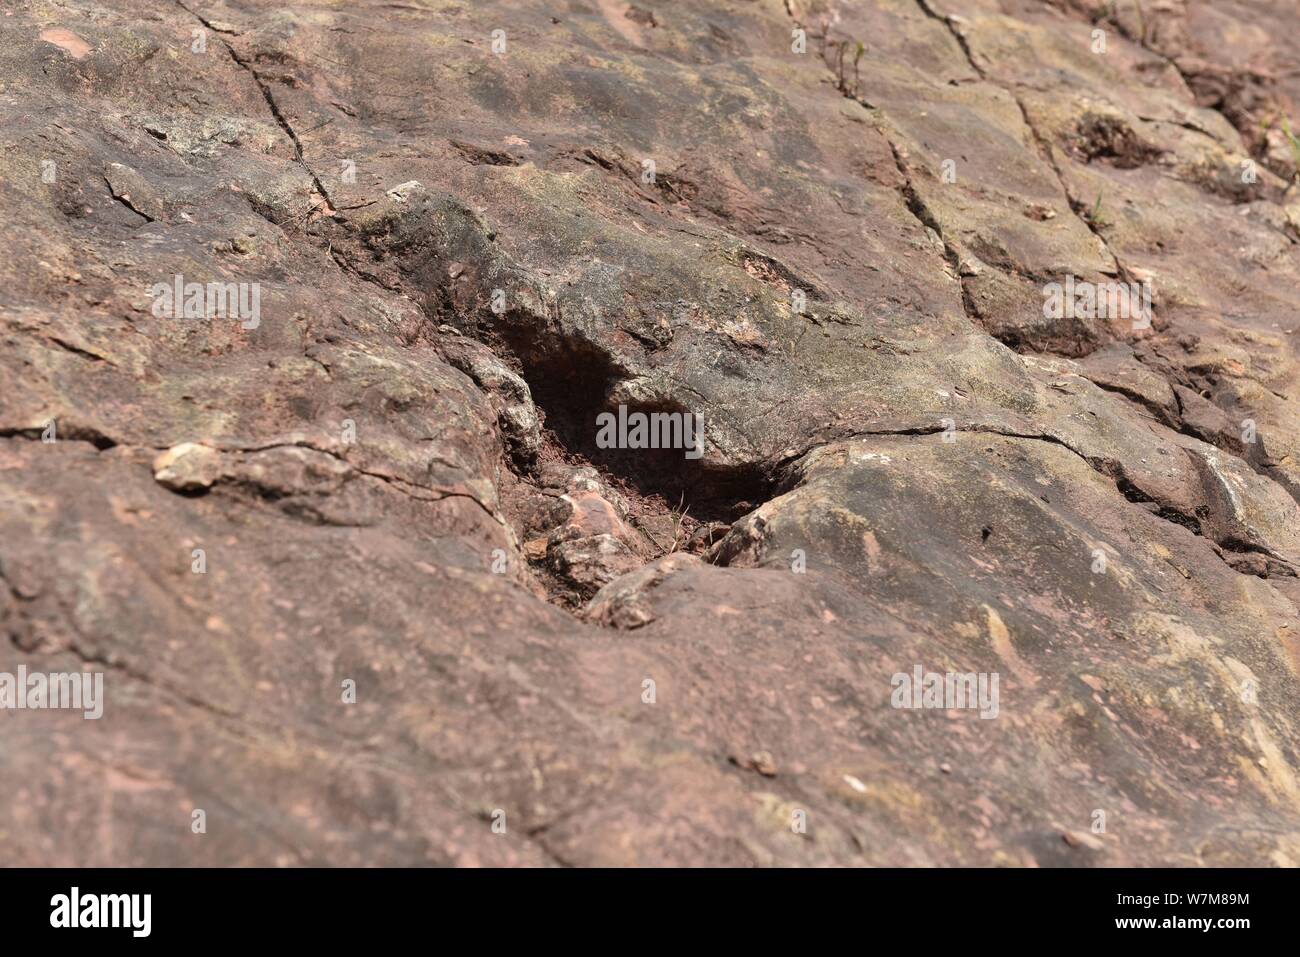 View of a dinosaur footprint of sauropod dinosaurs from the early Jurassic Period in Maotai town, Zunyi city, southwest China's Guizhou province, 21 A Stock Photo